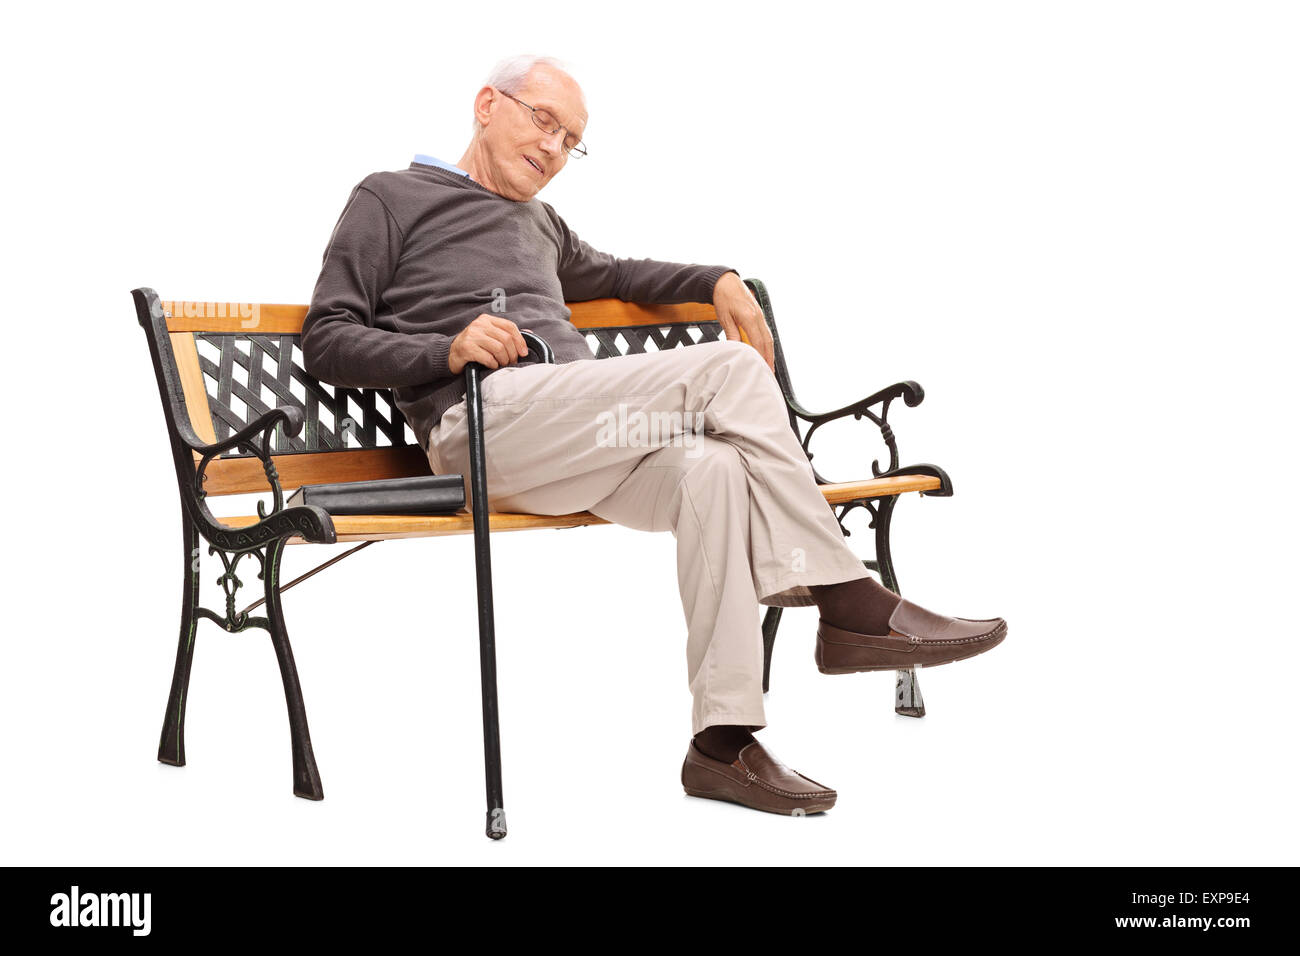 Studio shot of an old man with cane sleeping on a wooden bench with a book beside him isolated on white background Stock Photo